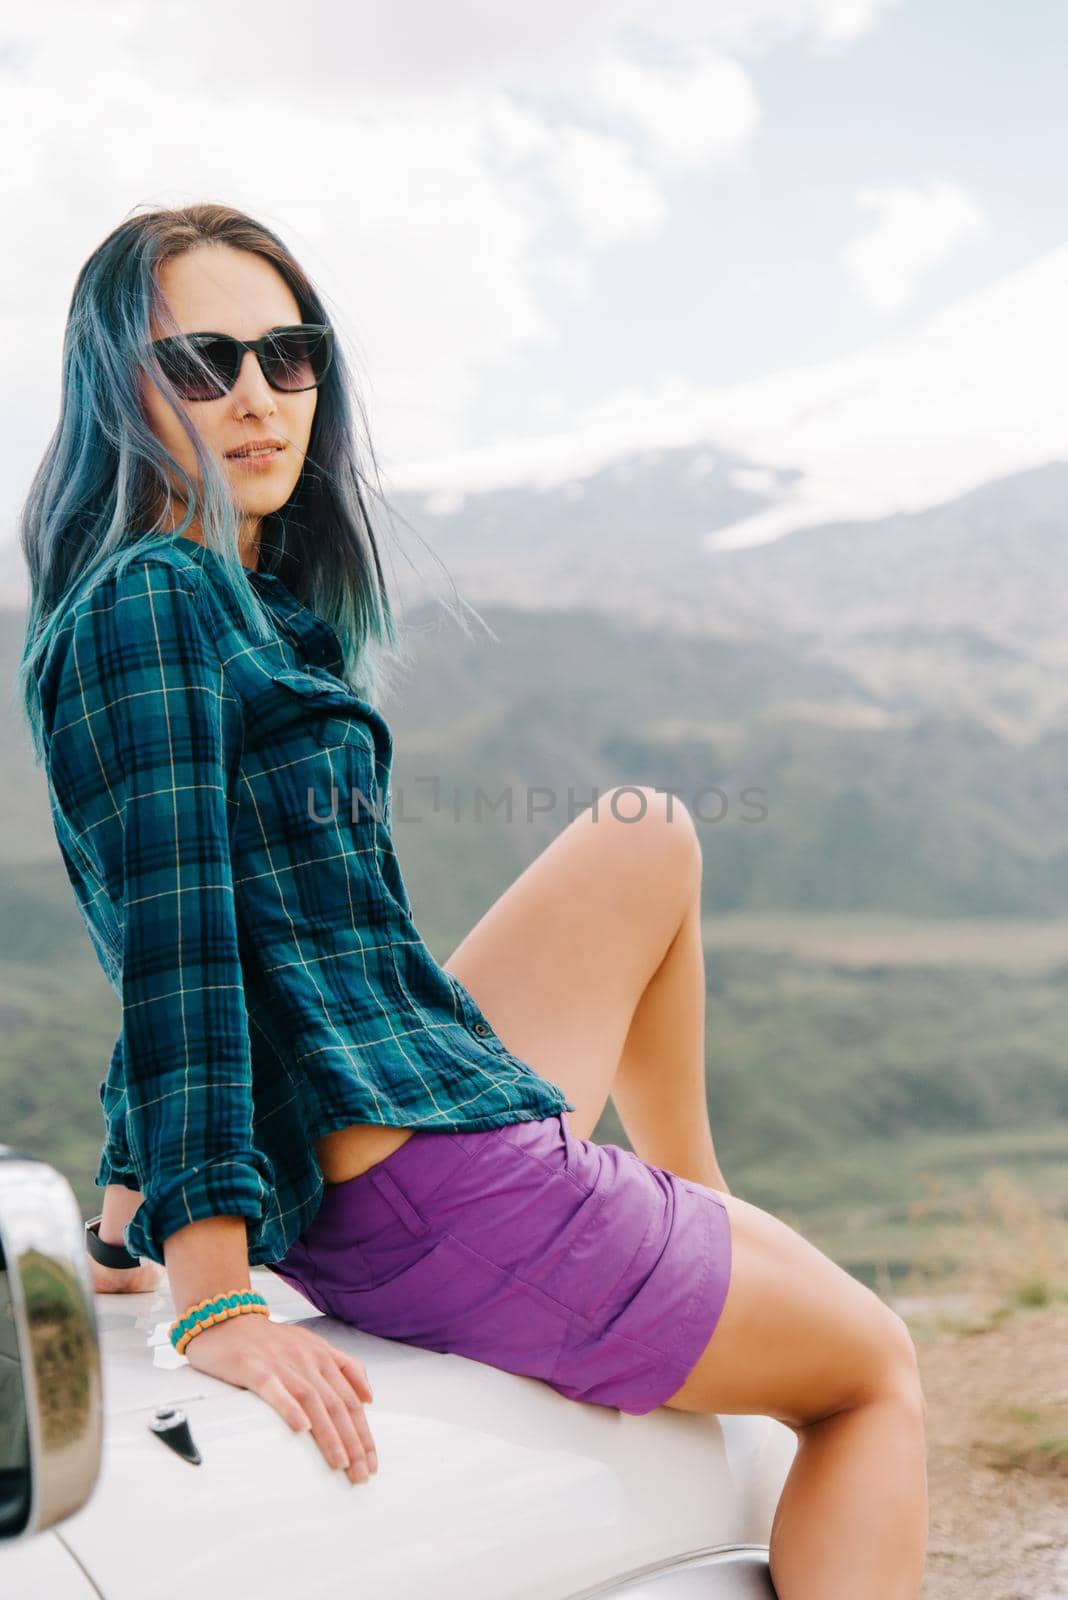 Explorer young woman sitting on car on background of mountains, looking at camera.